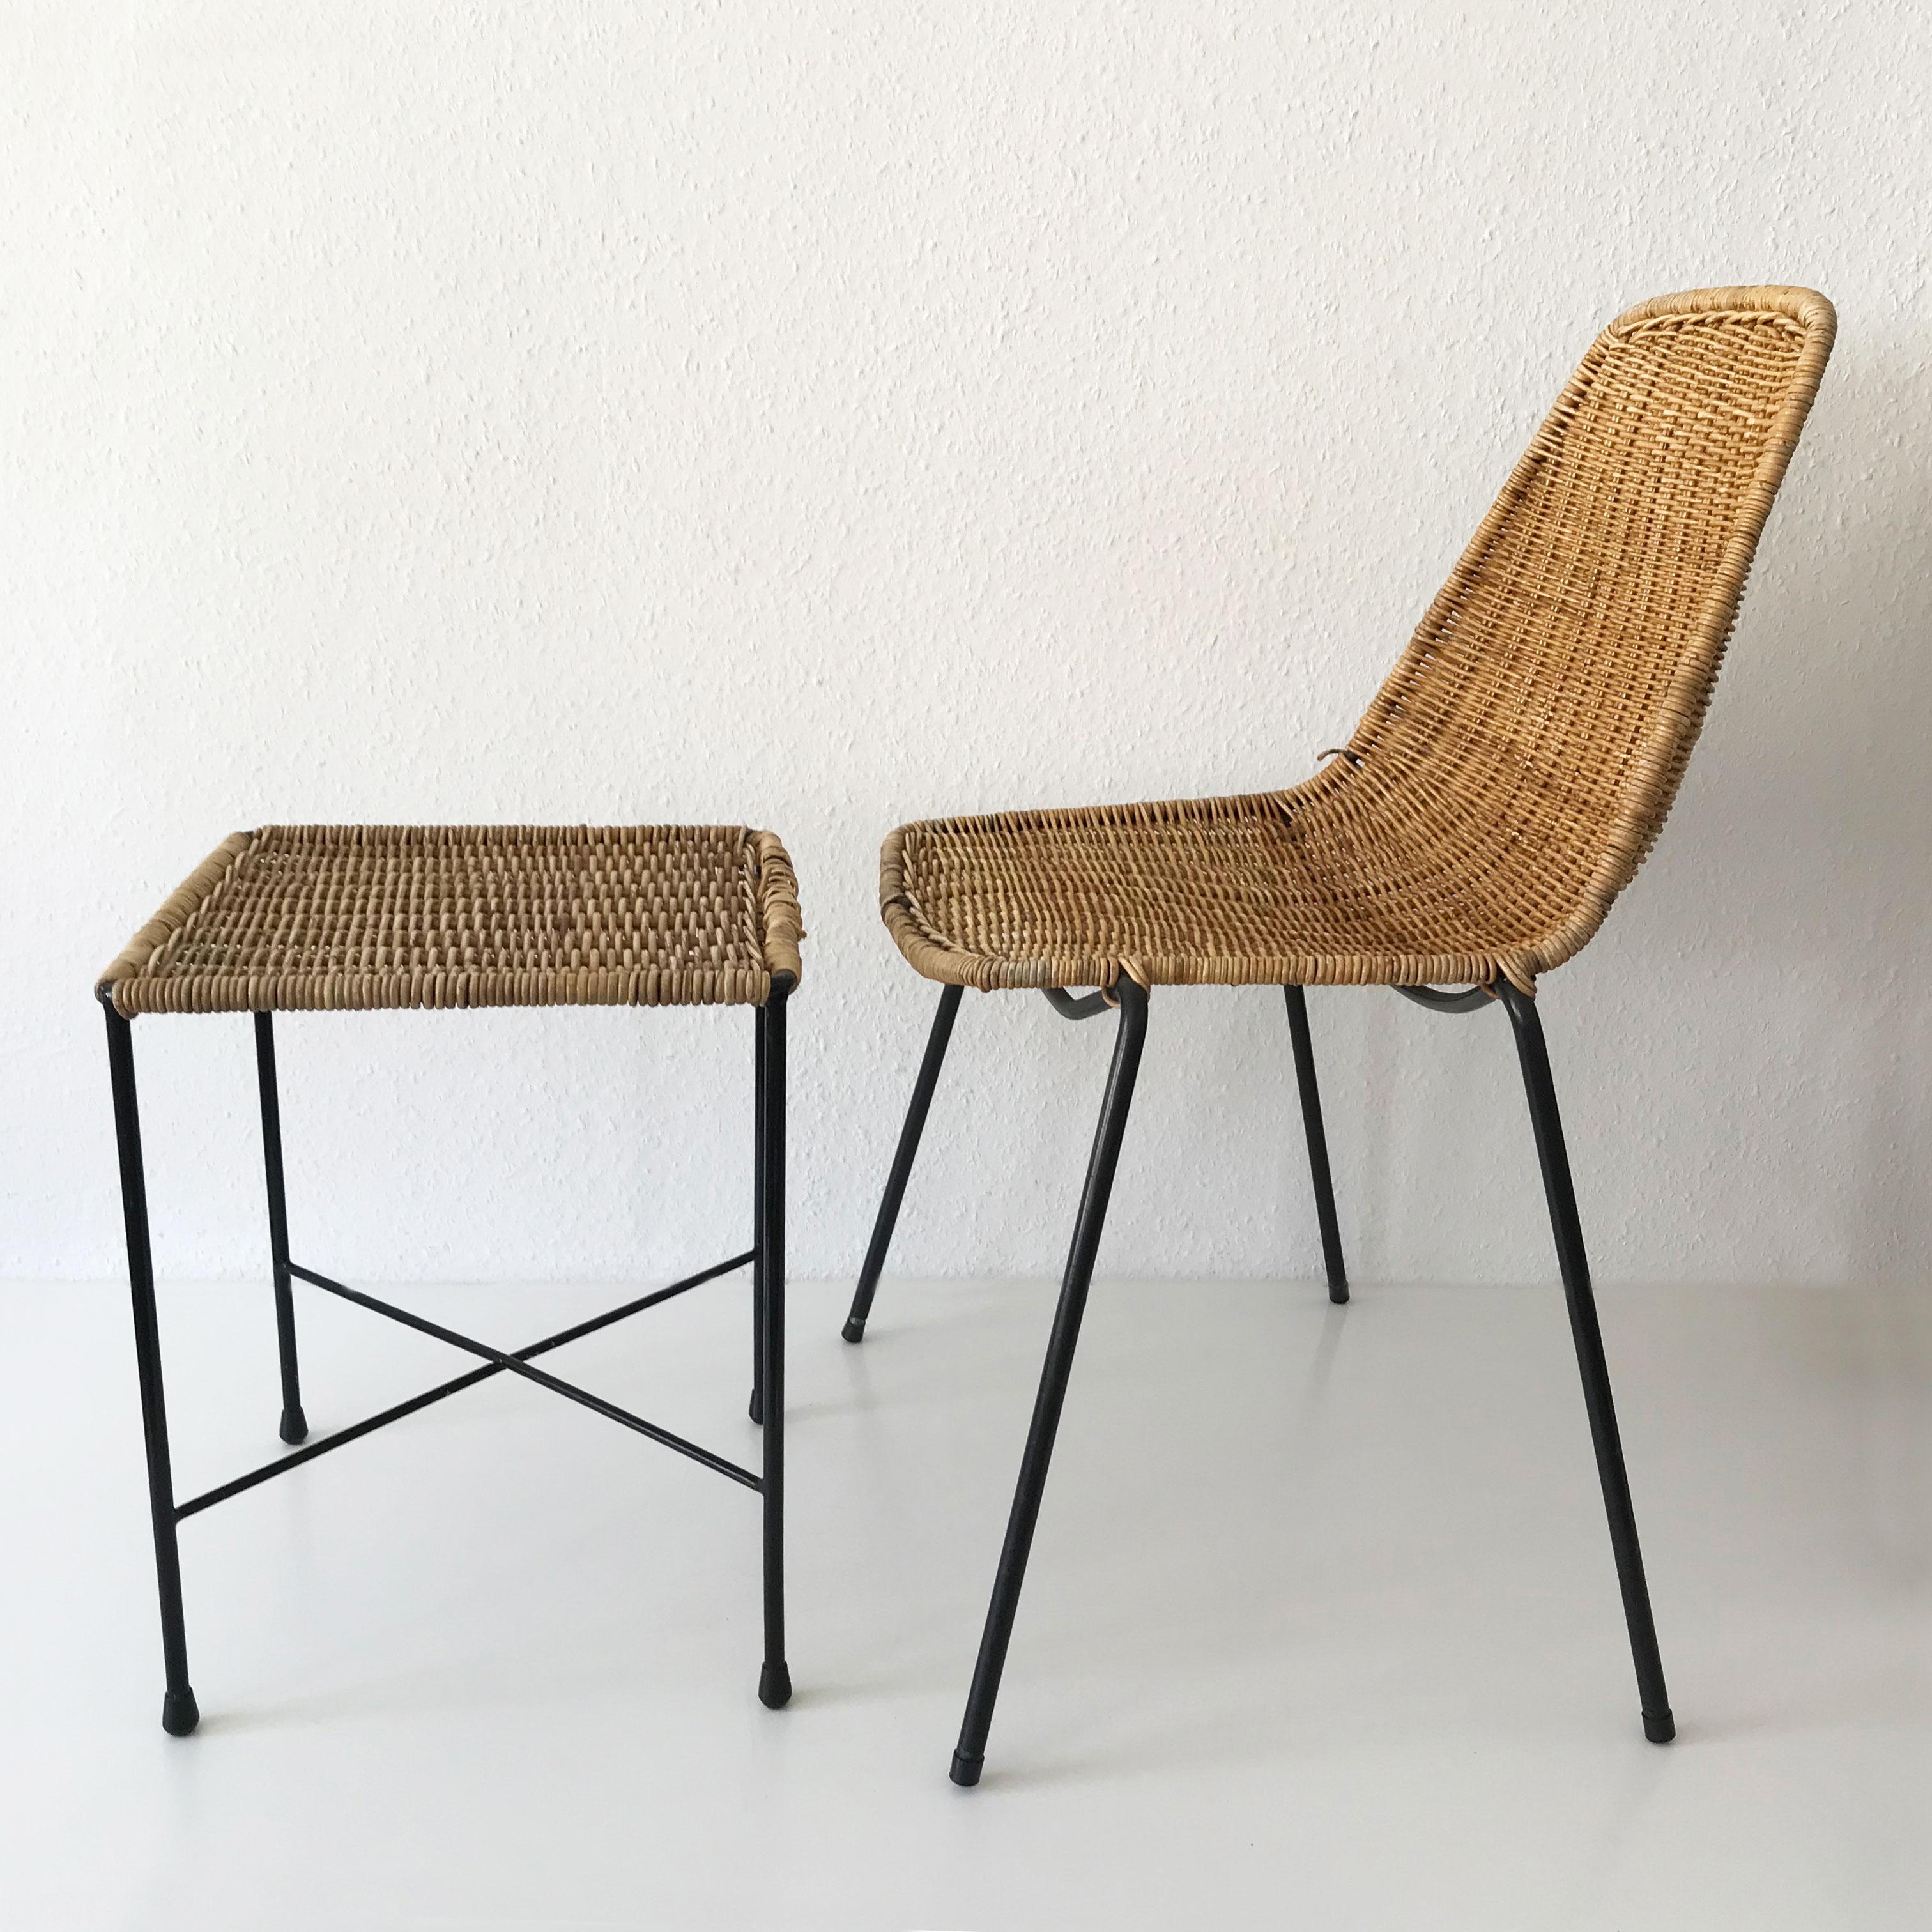 Set of Two Basket Chairs and Stool by Gian Franco Legler, 1951, Switzerland 5